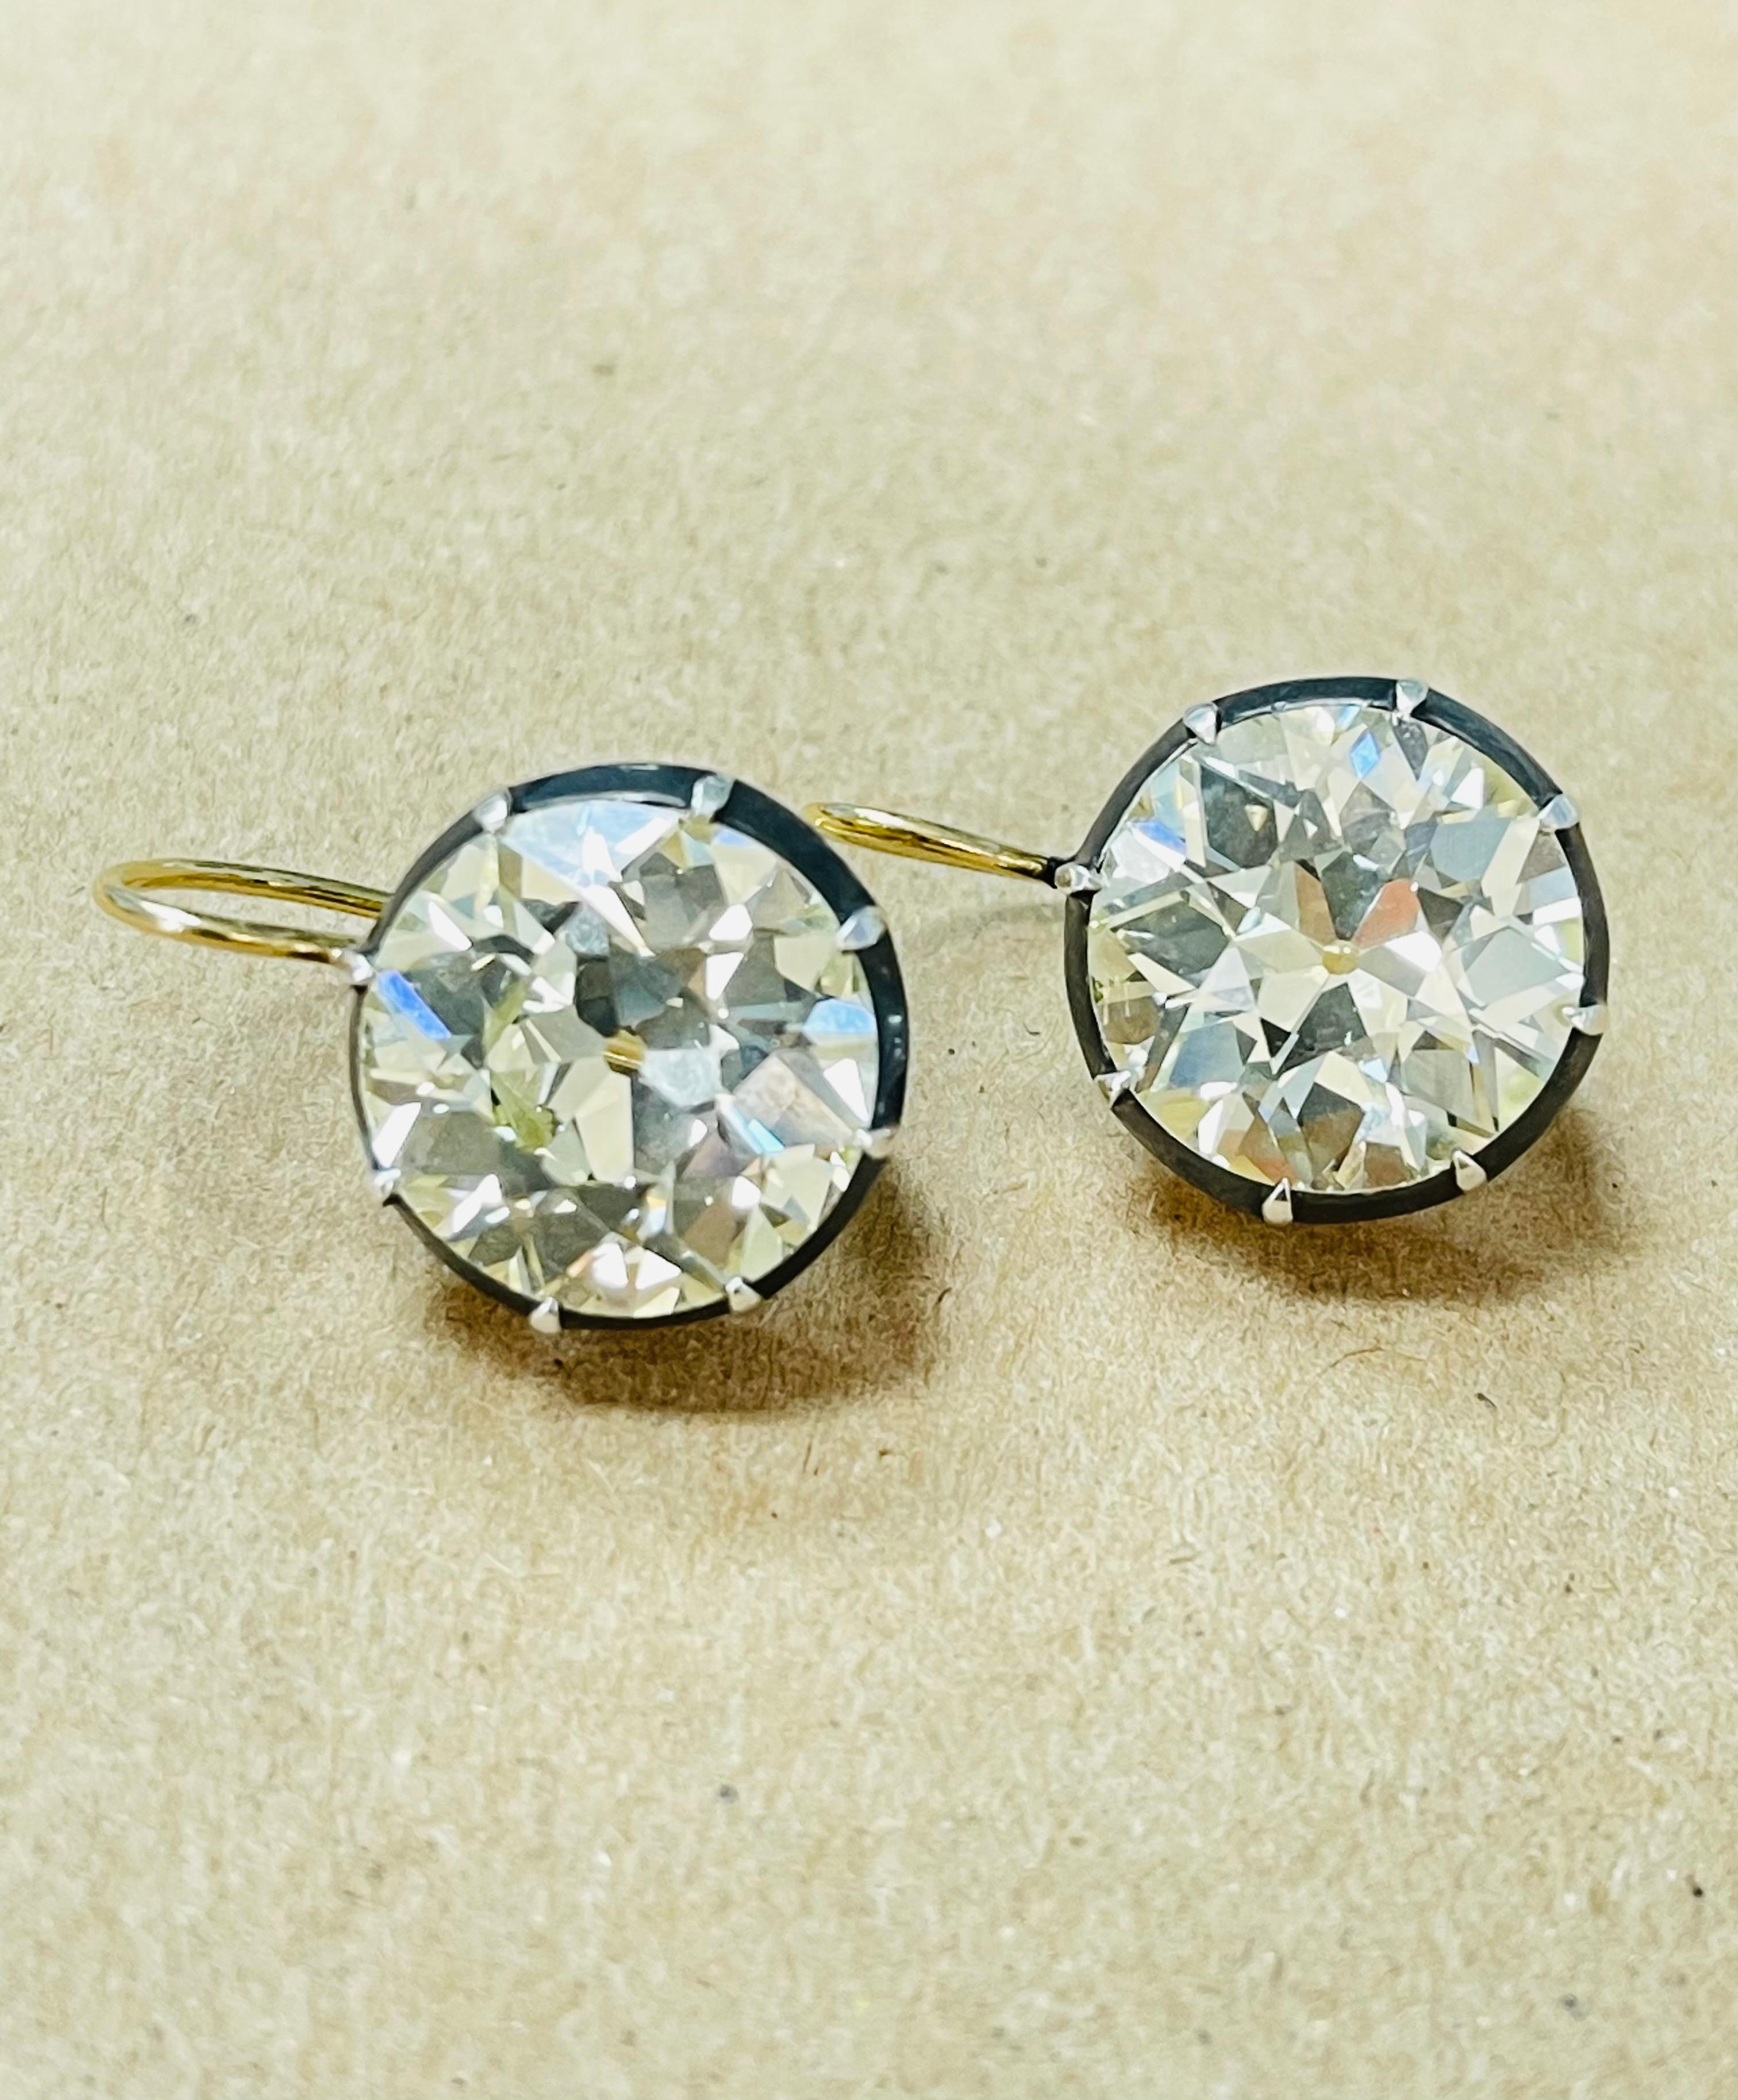 Antique Style Old European Cut Diamond Dangle Earrings In Silver And Yellow Gold 3